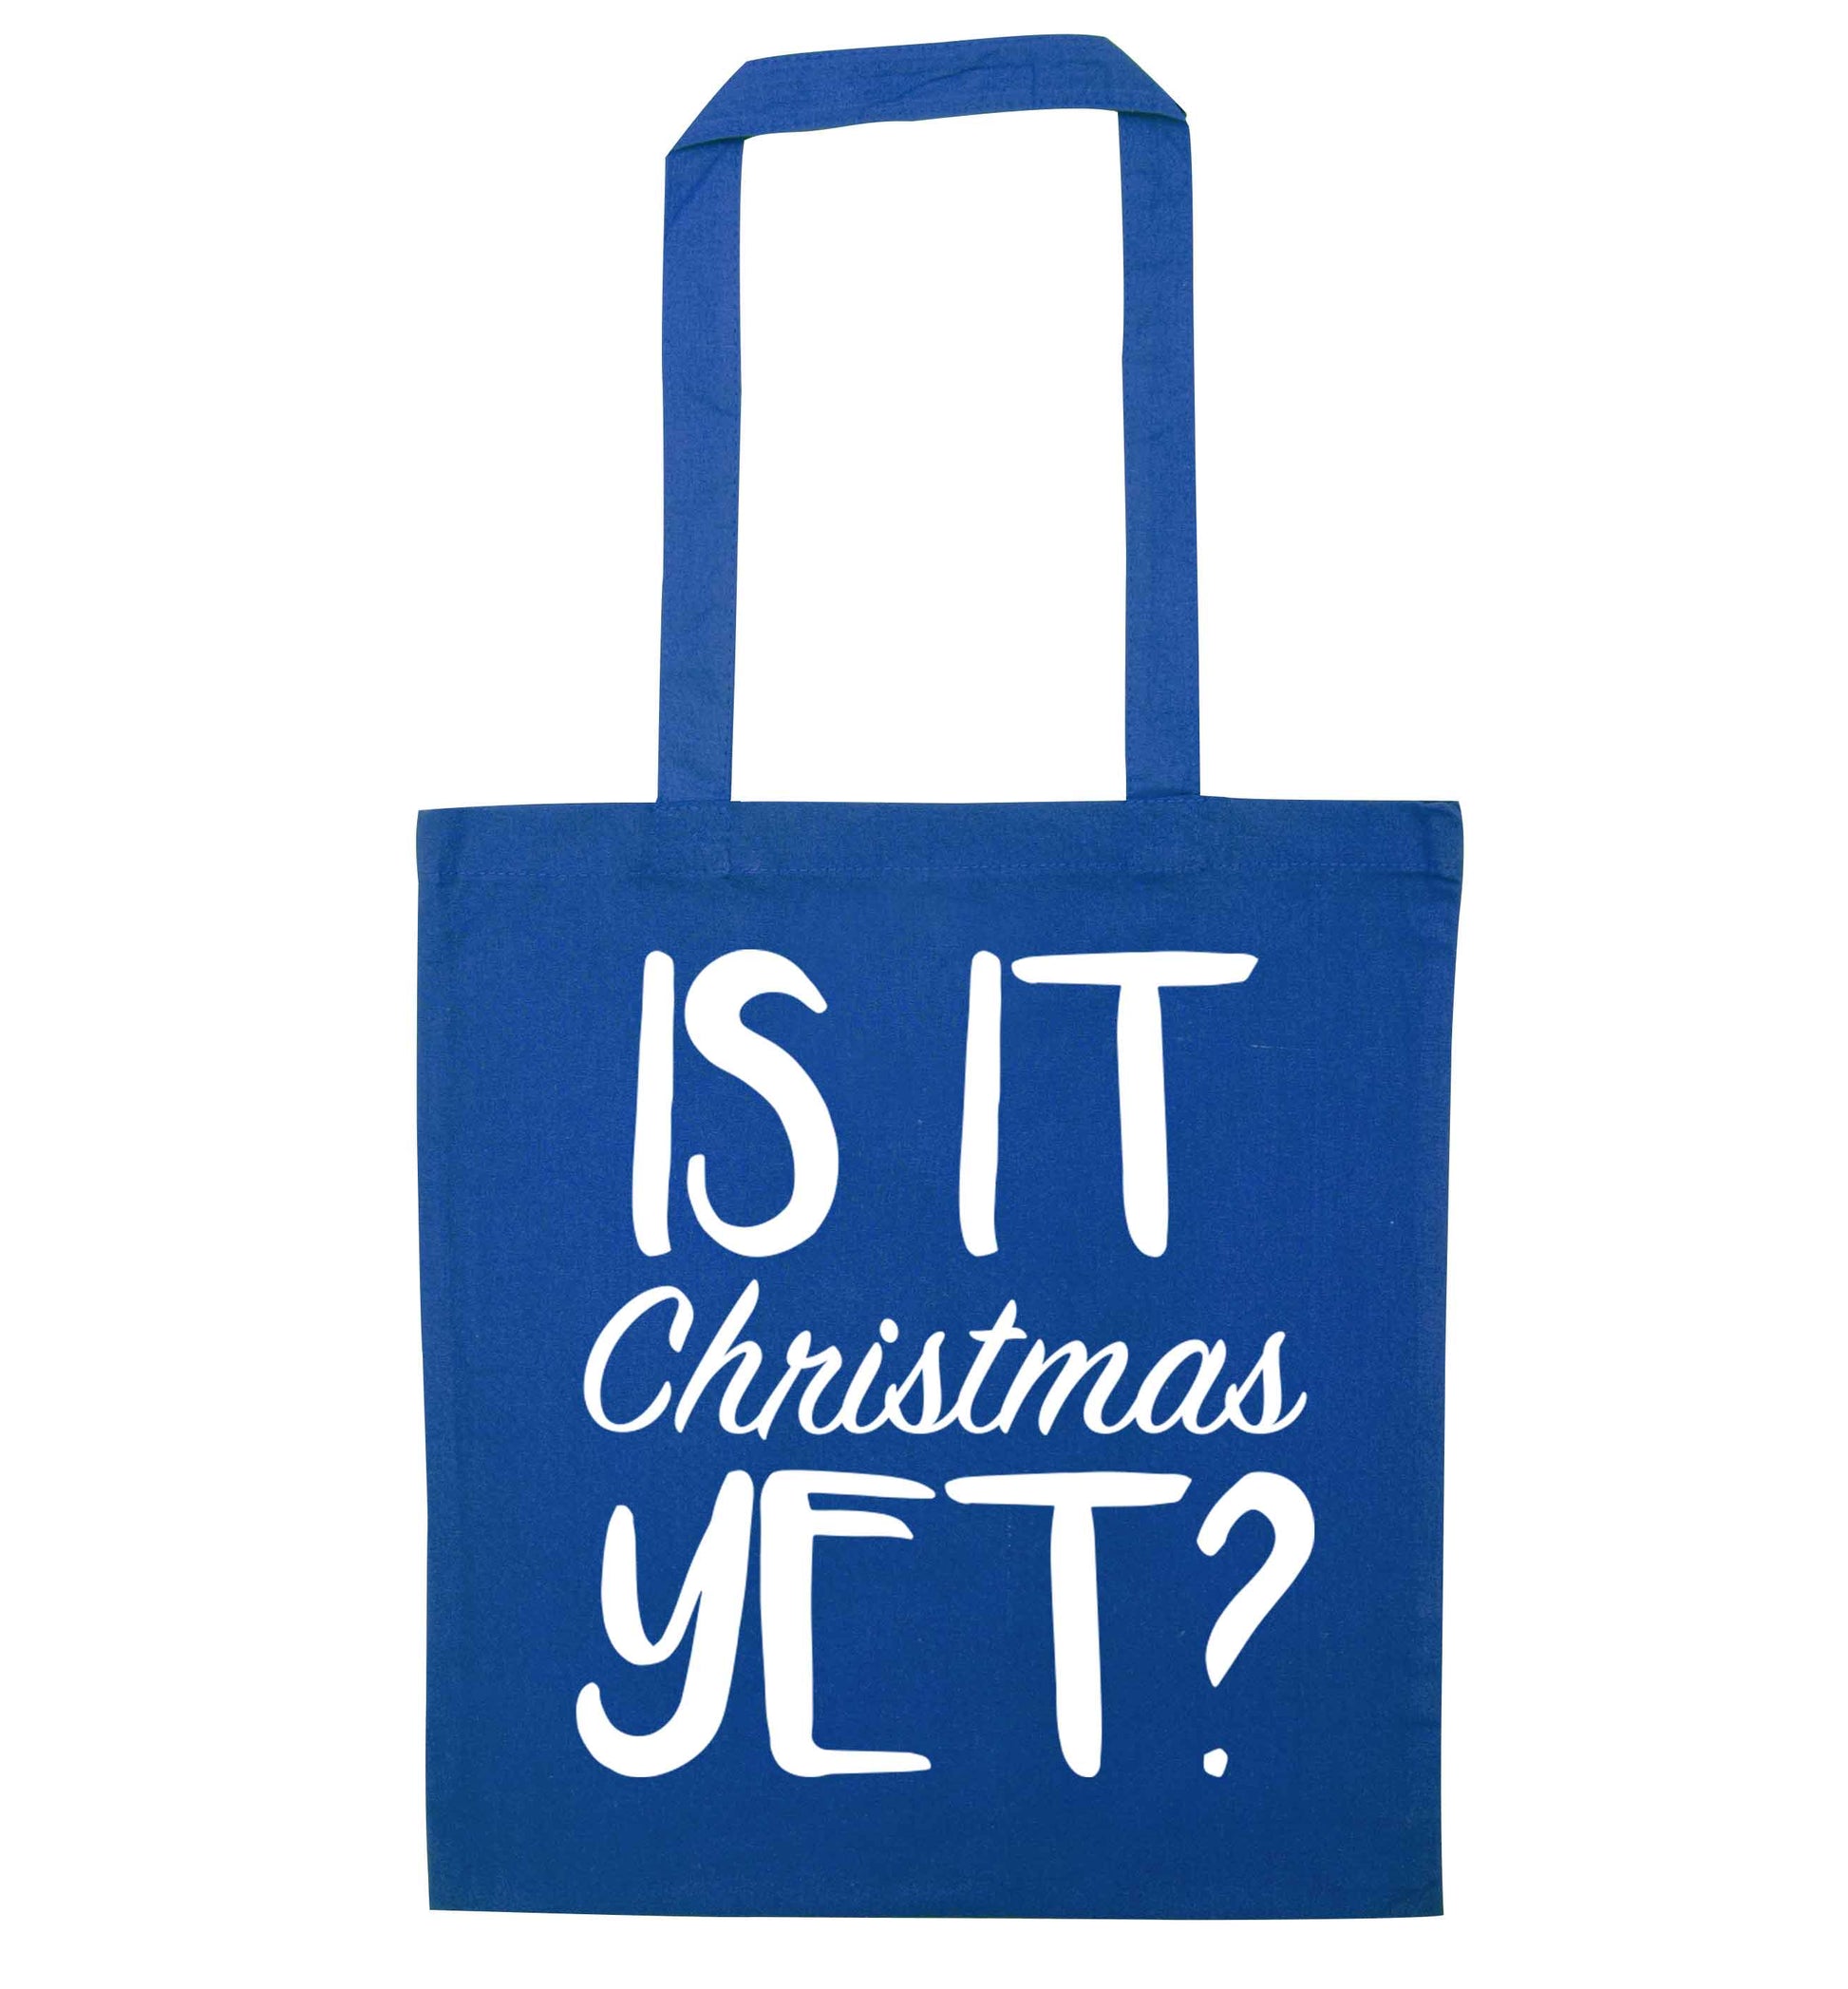 Is it Christmas yet? blue tote bag